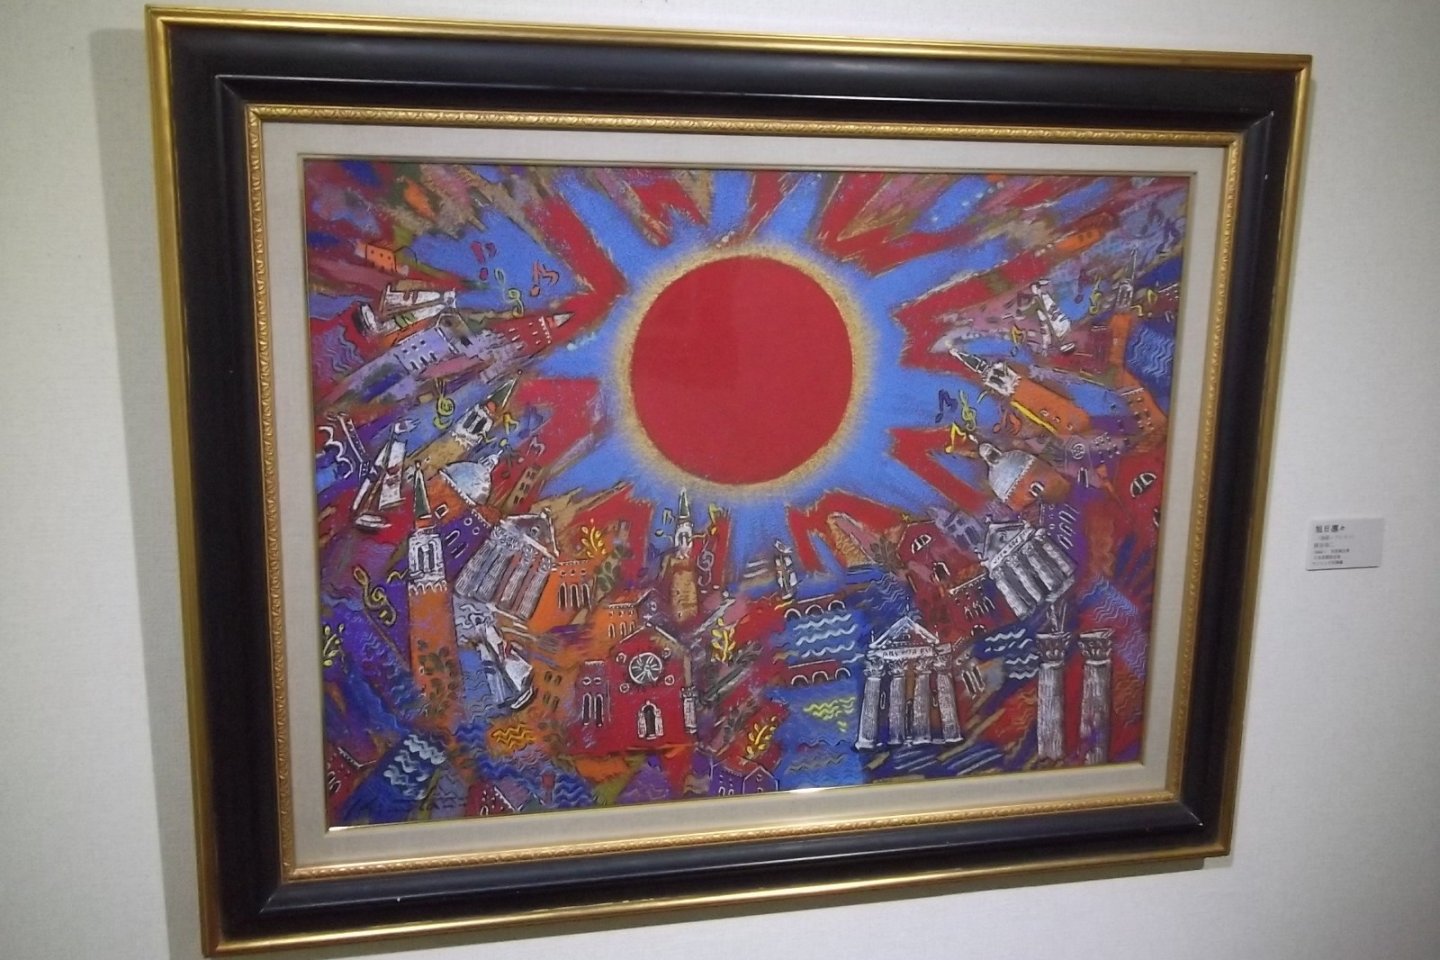 A colorful painting from the permanent collection, reproduced on the outside of the museum